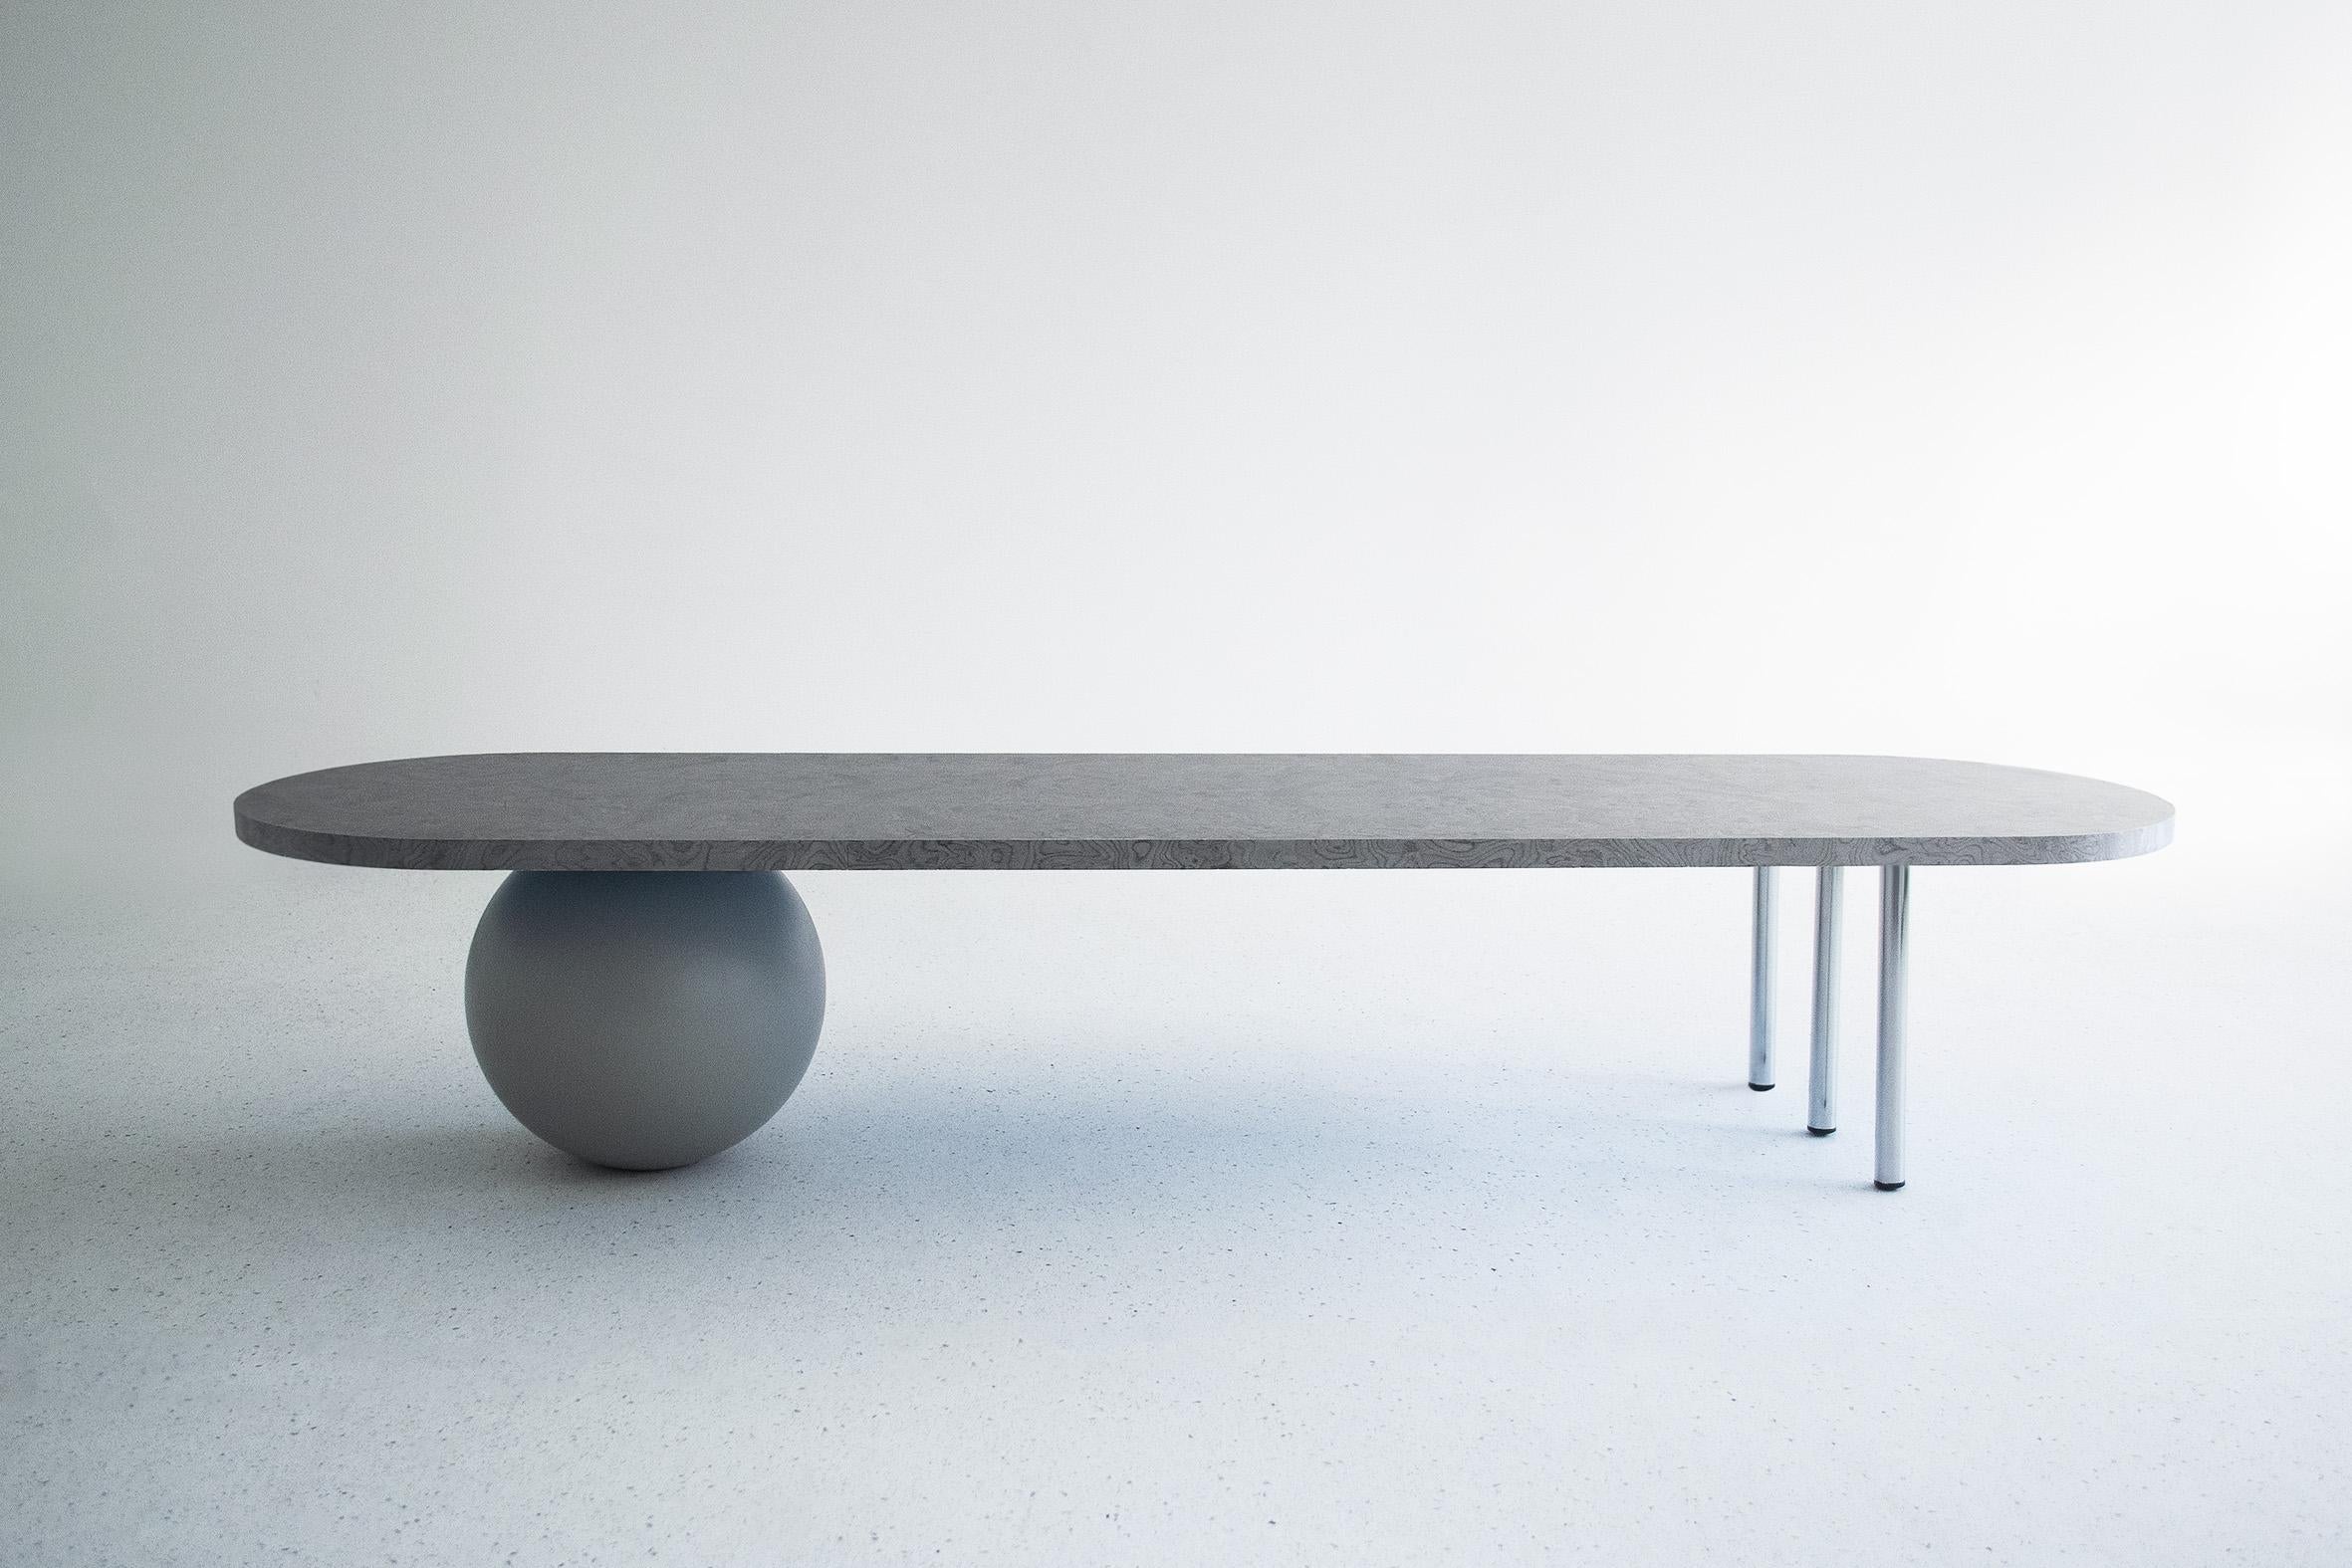 Sea surface long low table by Studio Christinekalia
Dimensions: W 45 x D 160 x H 30 cm.
Materials: Swedish pine solid wood, MDF, stainless steel, veneer.

Derived from the element of the sphere, this low wooden table piece plays with the idea of